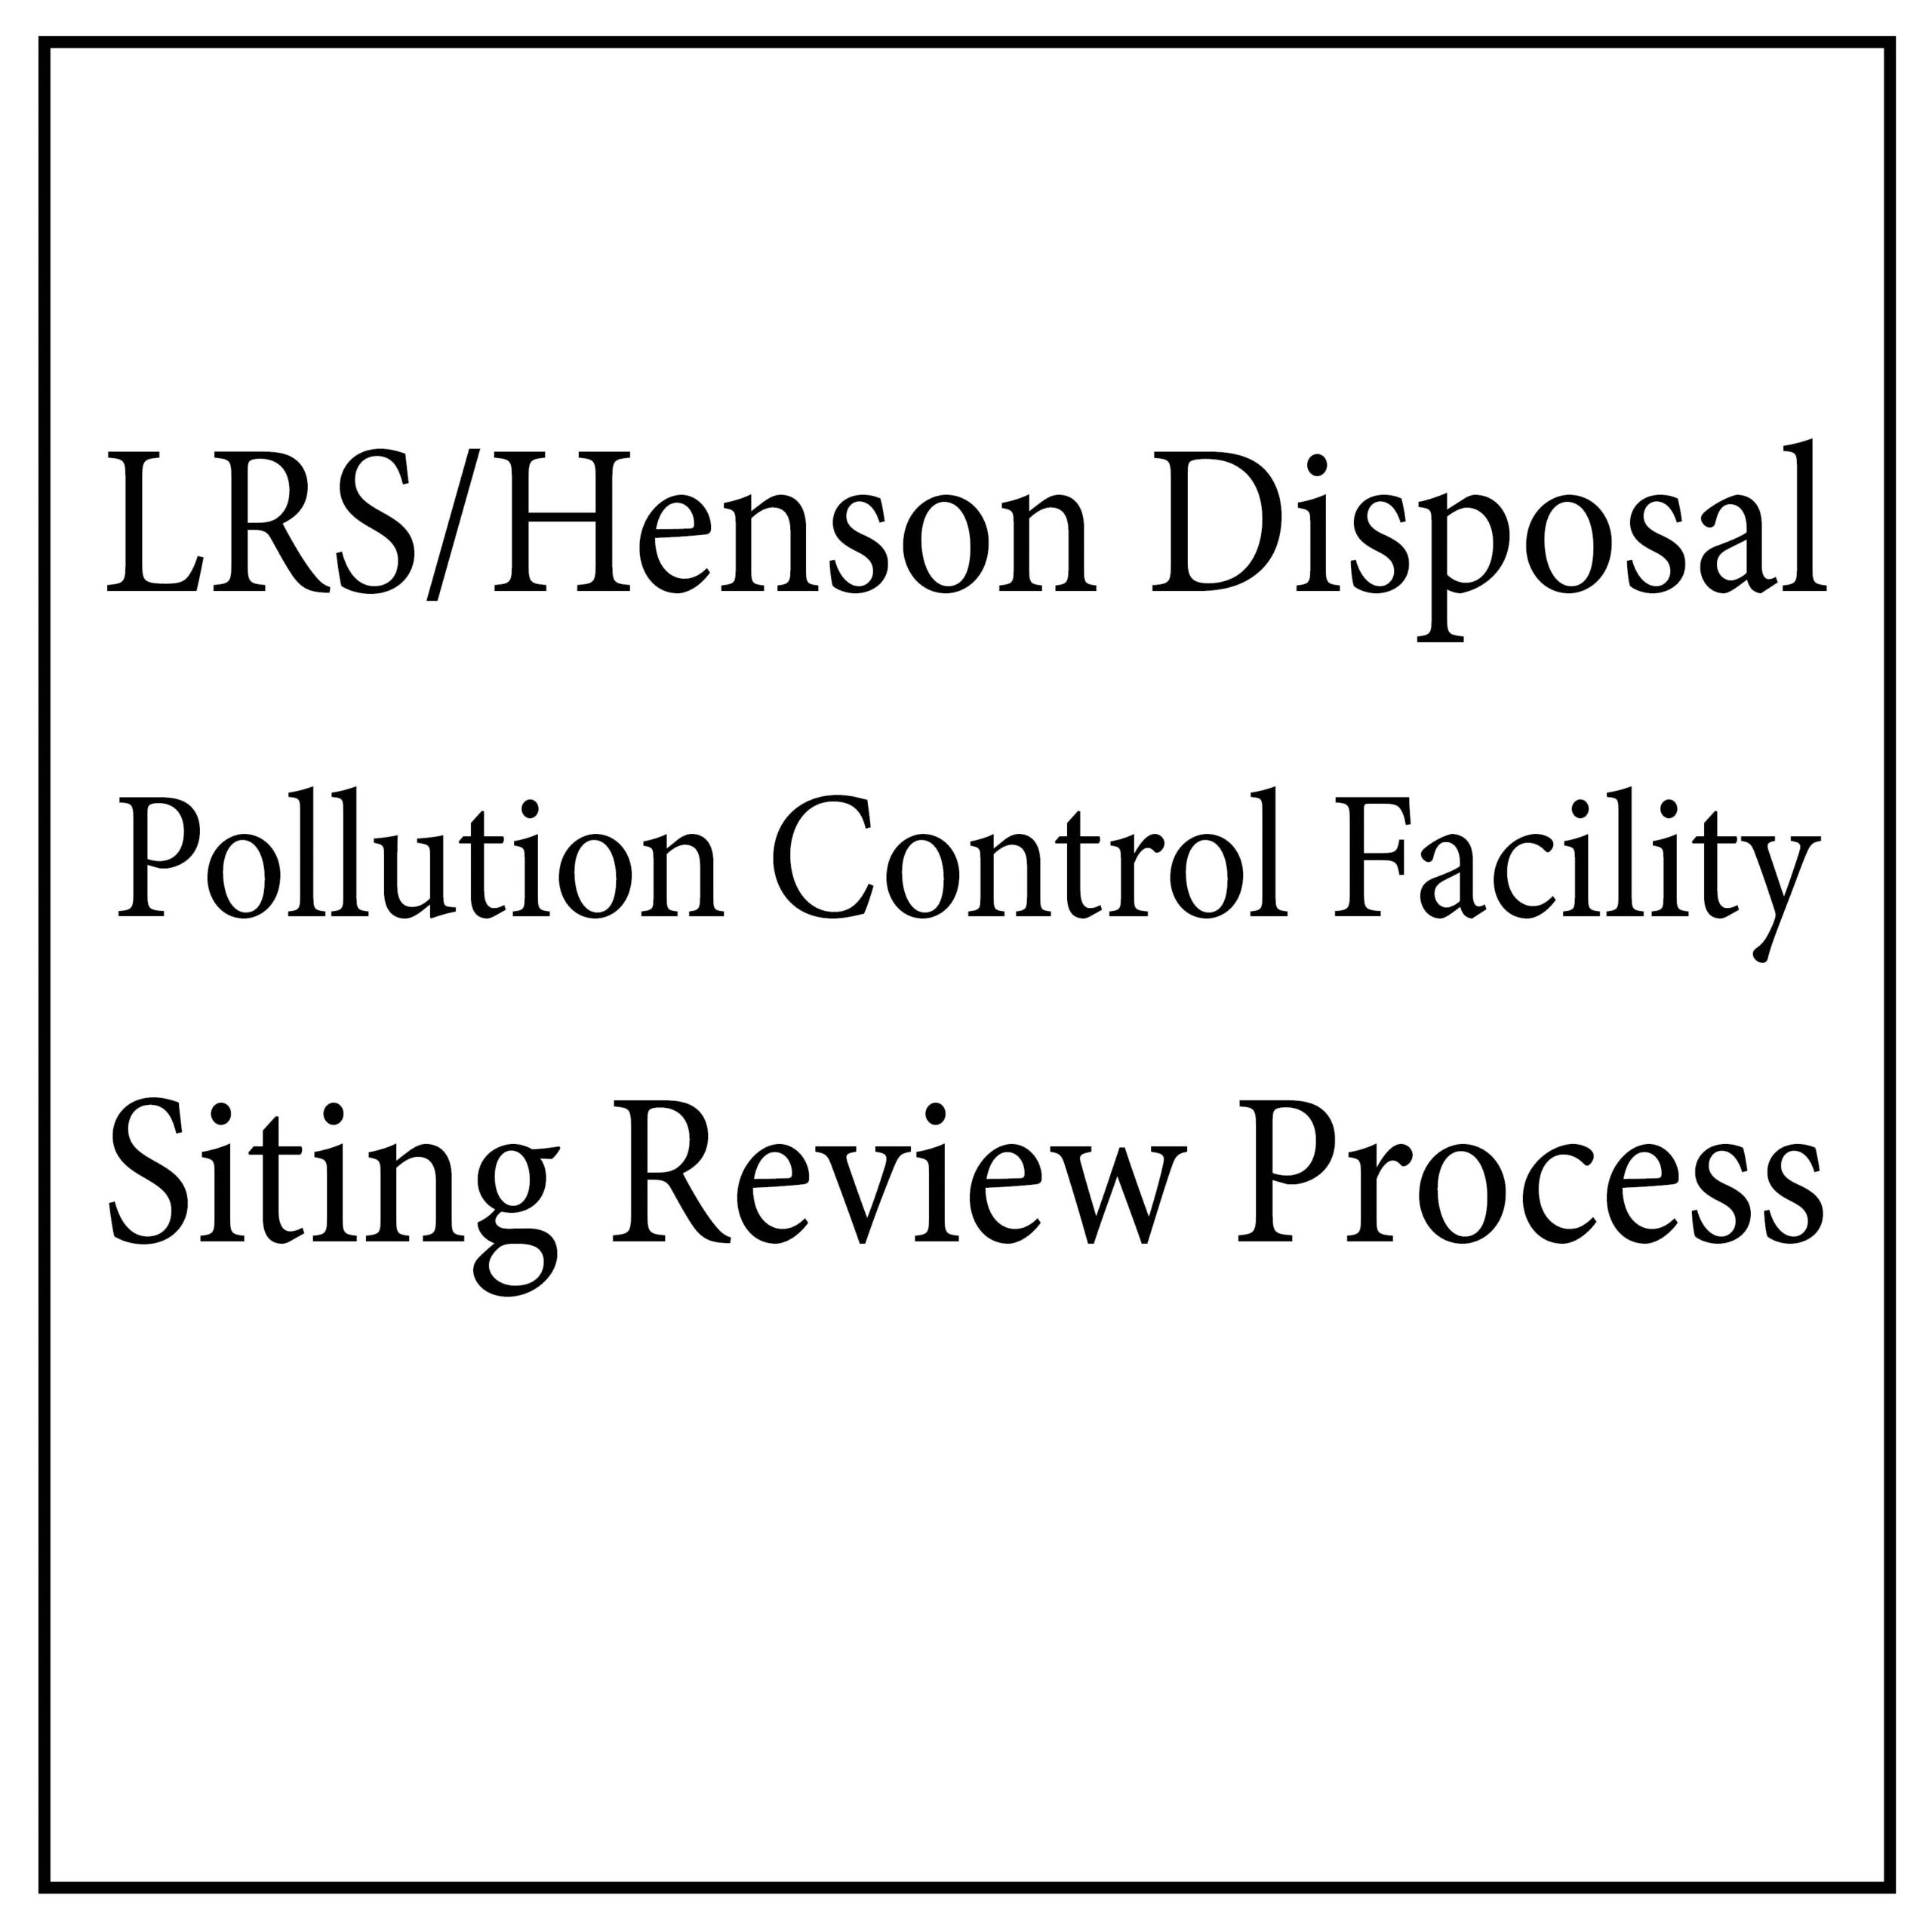 LRS Henson Disposal Pollution Control Facility Siting Review Process